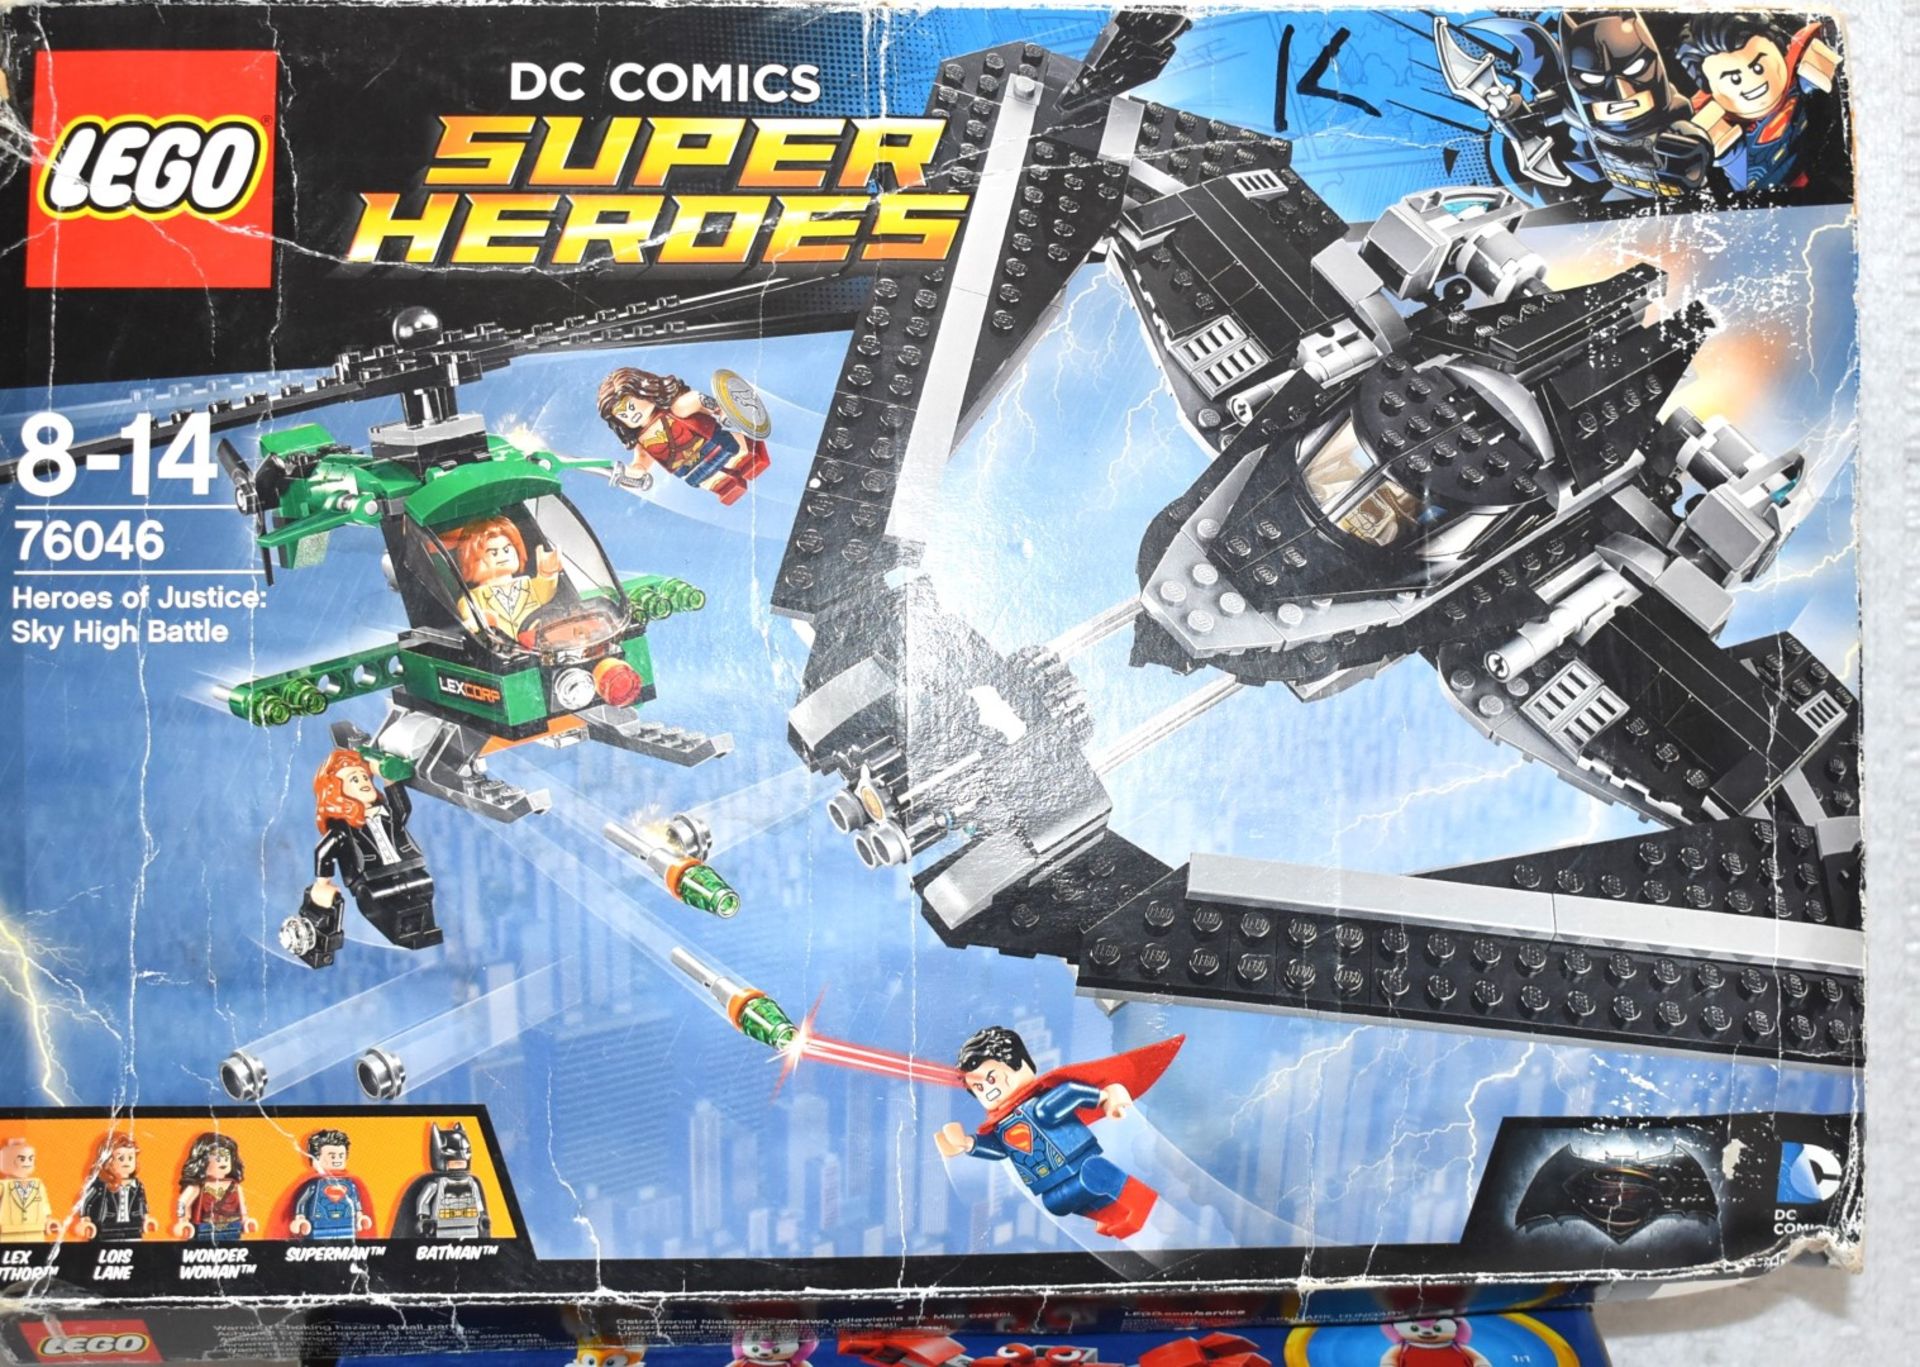 2 x Lego Sets - DC Comics Super Heroes and Sonic the Hedgehog - Boxed With Some Sealed Bags - Image 13 of 13